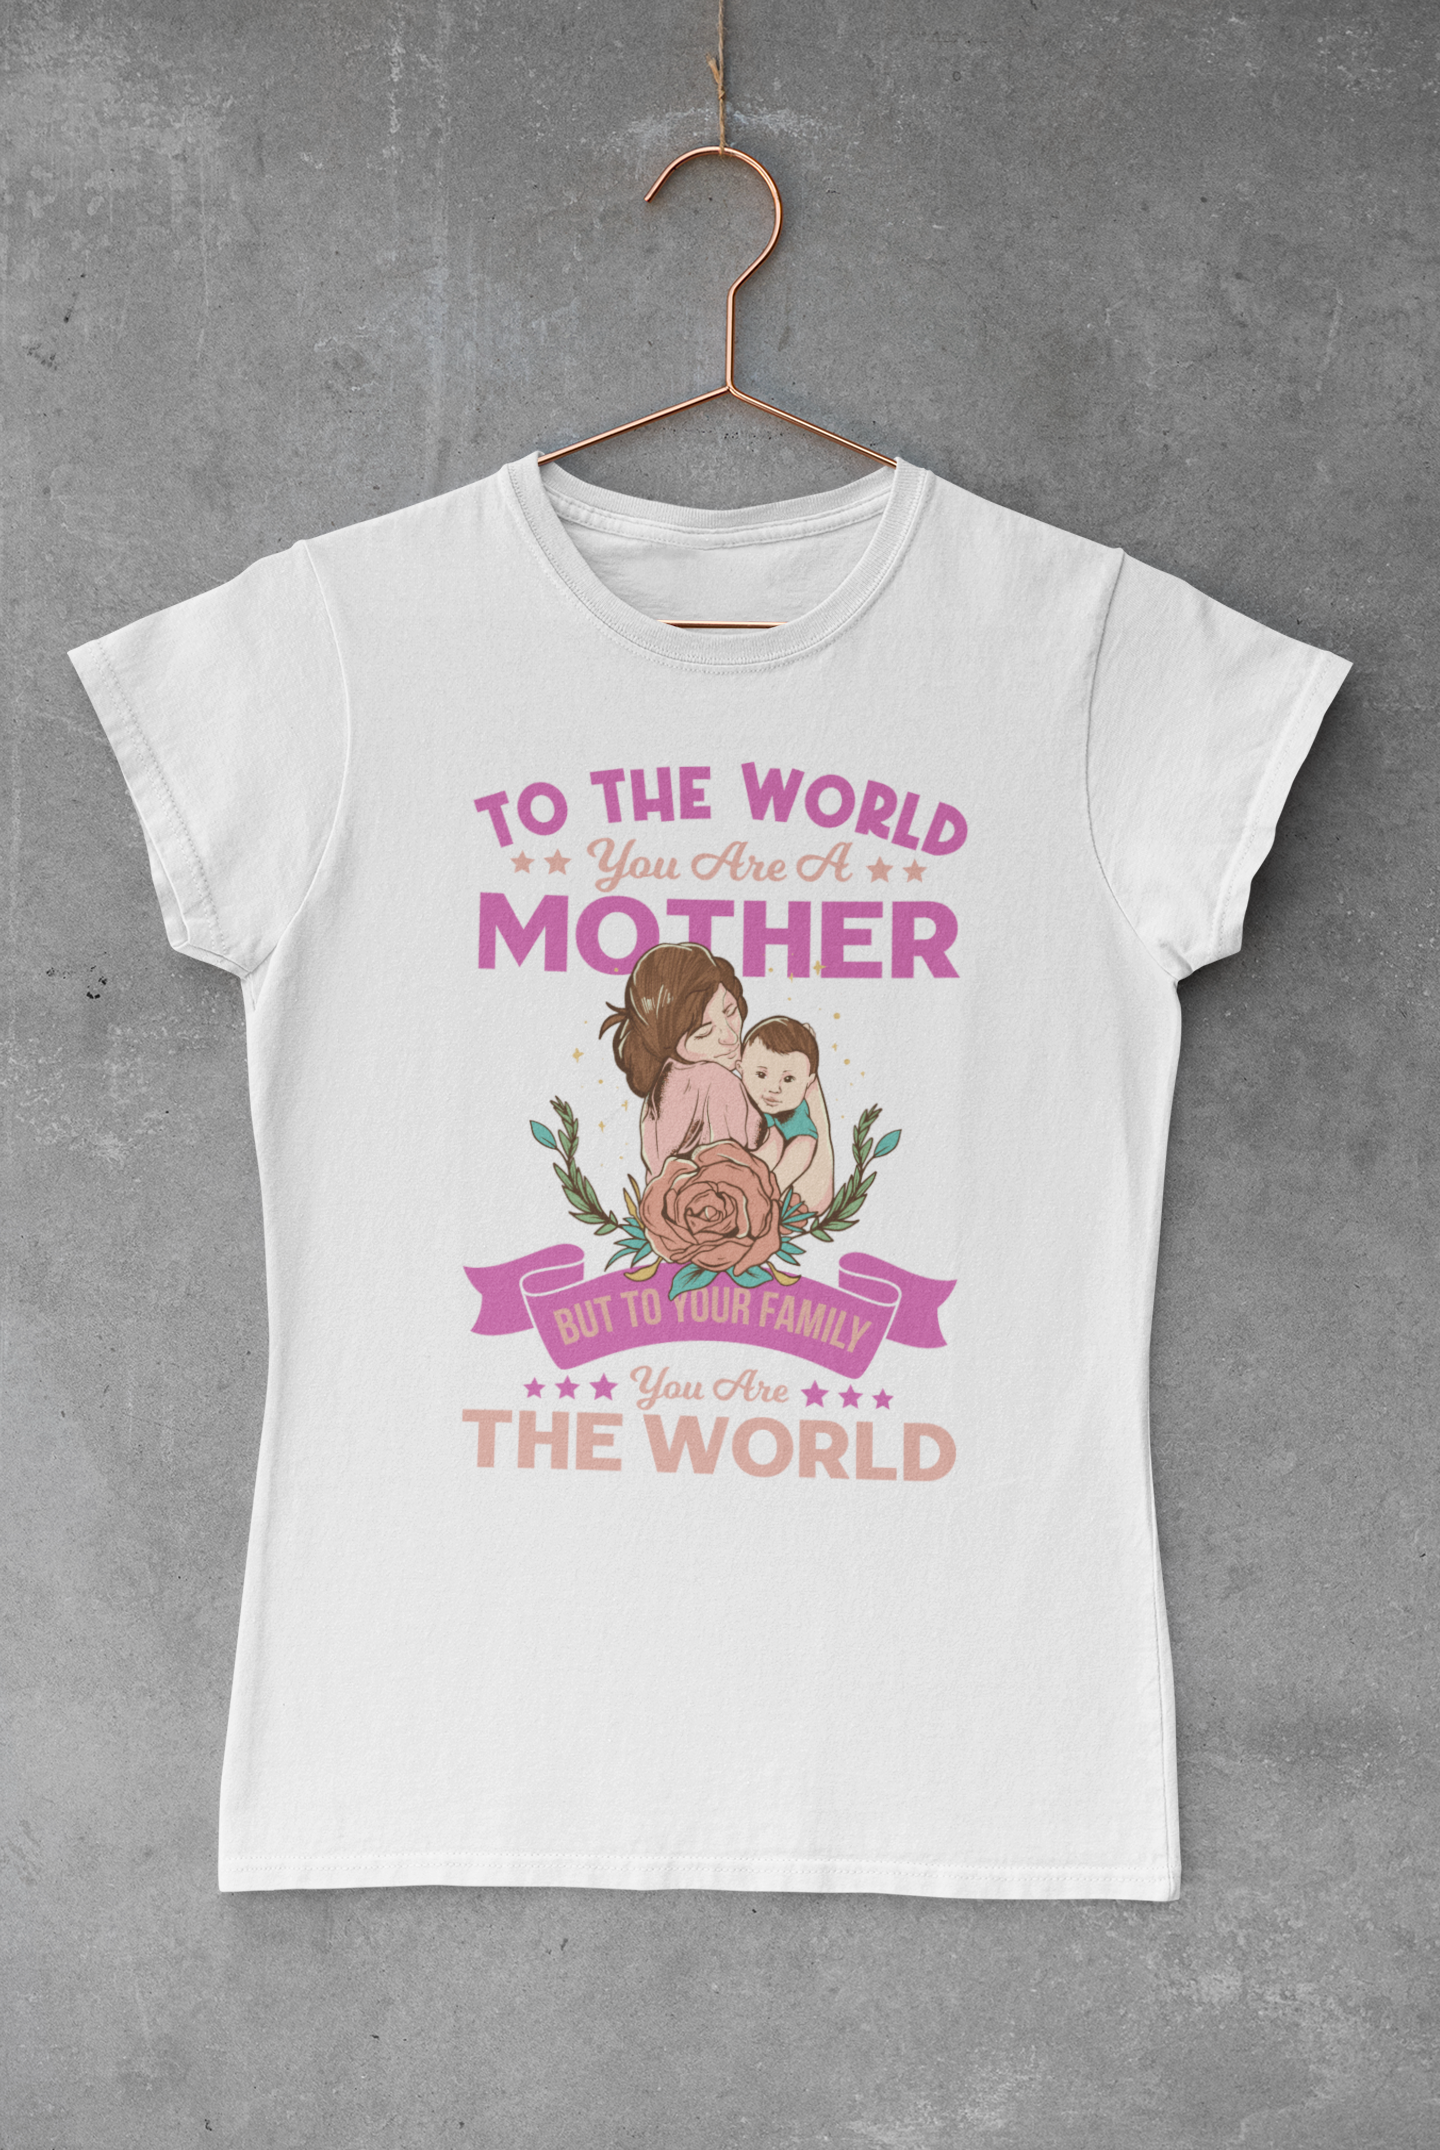 To Your Family You Are The World T-shirt